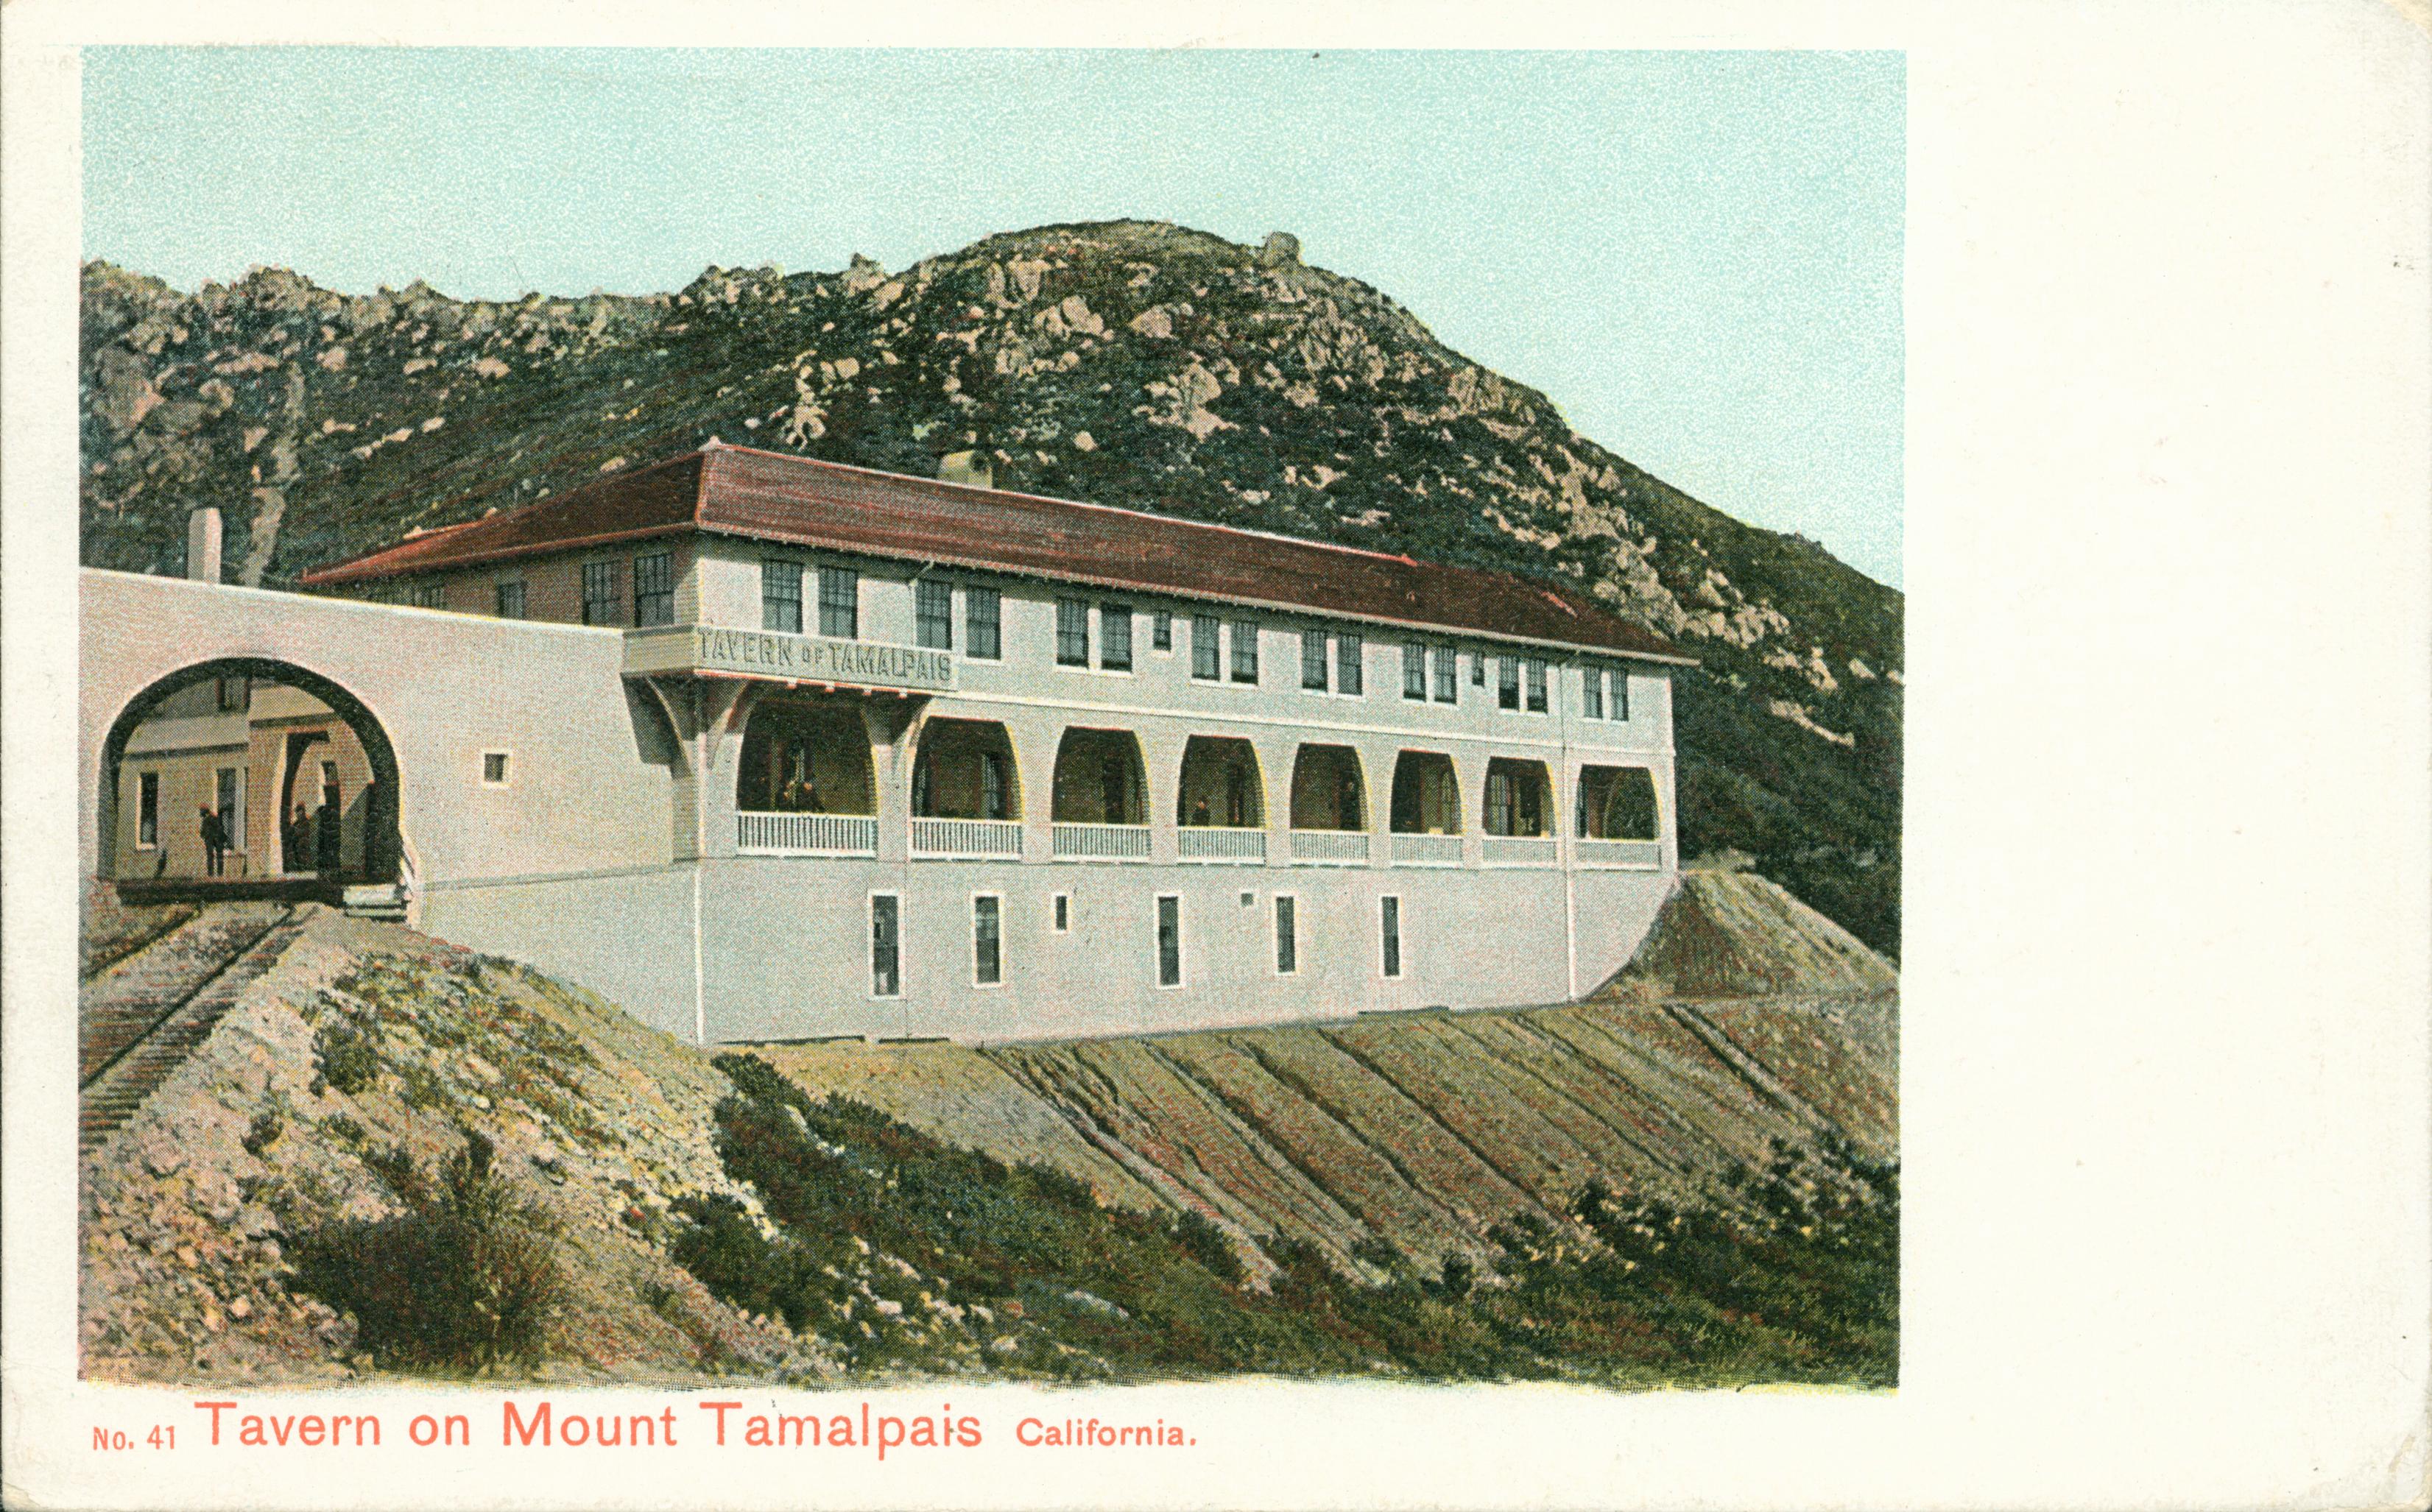 View of Mt. Tamalpais, trees, hills and buildings in background, train tracks in foreground